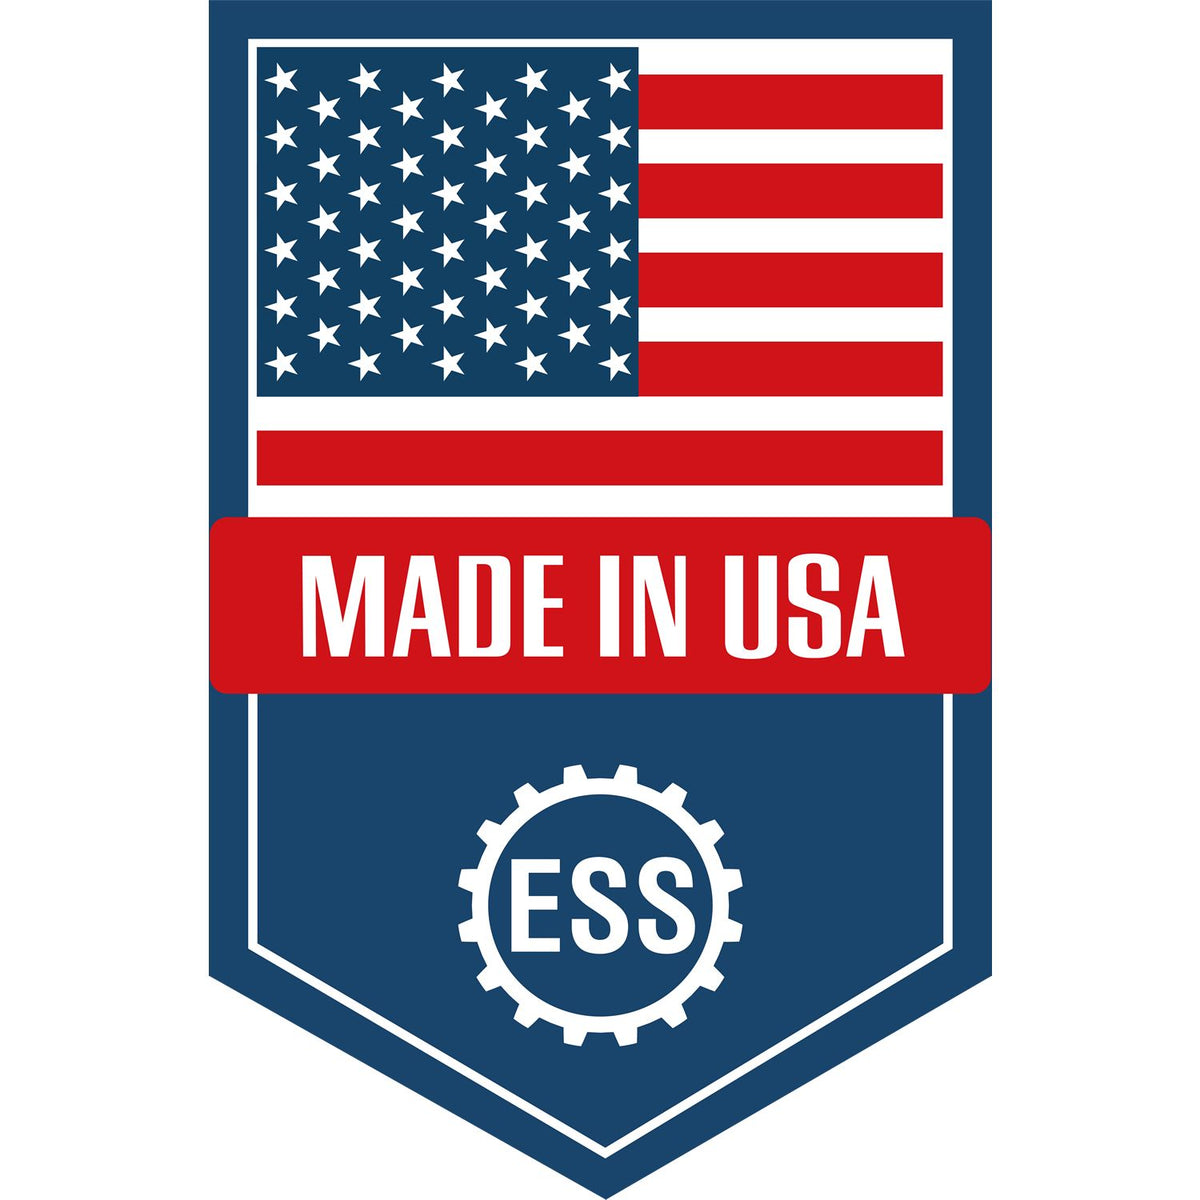 An icon or graphic with an american flag and text reading Made in USA for the State of Maryland Extended Long Reach Geologist Seal